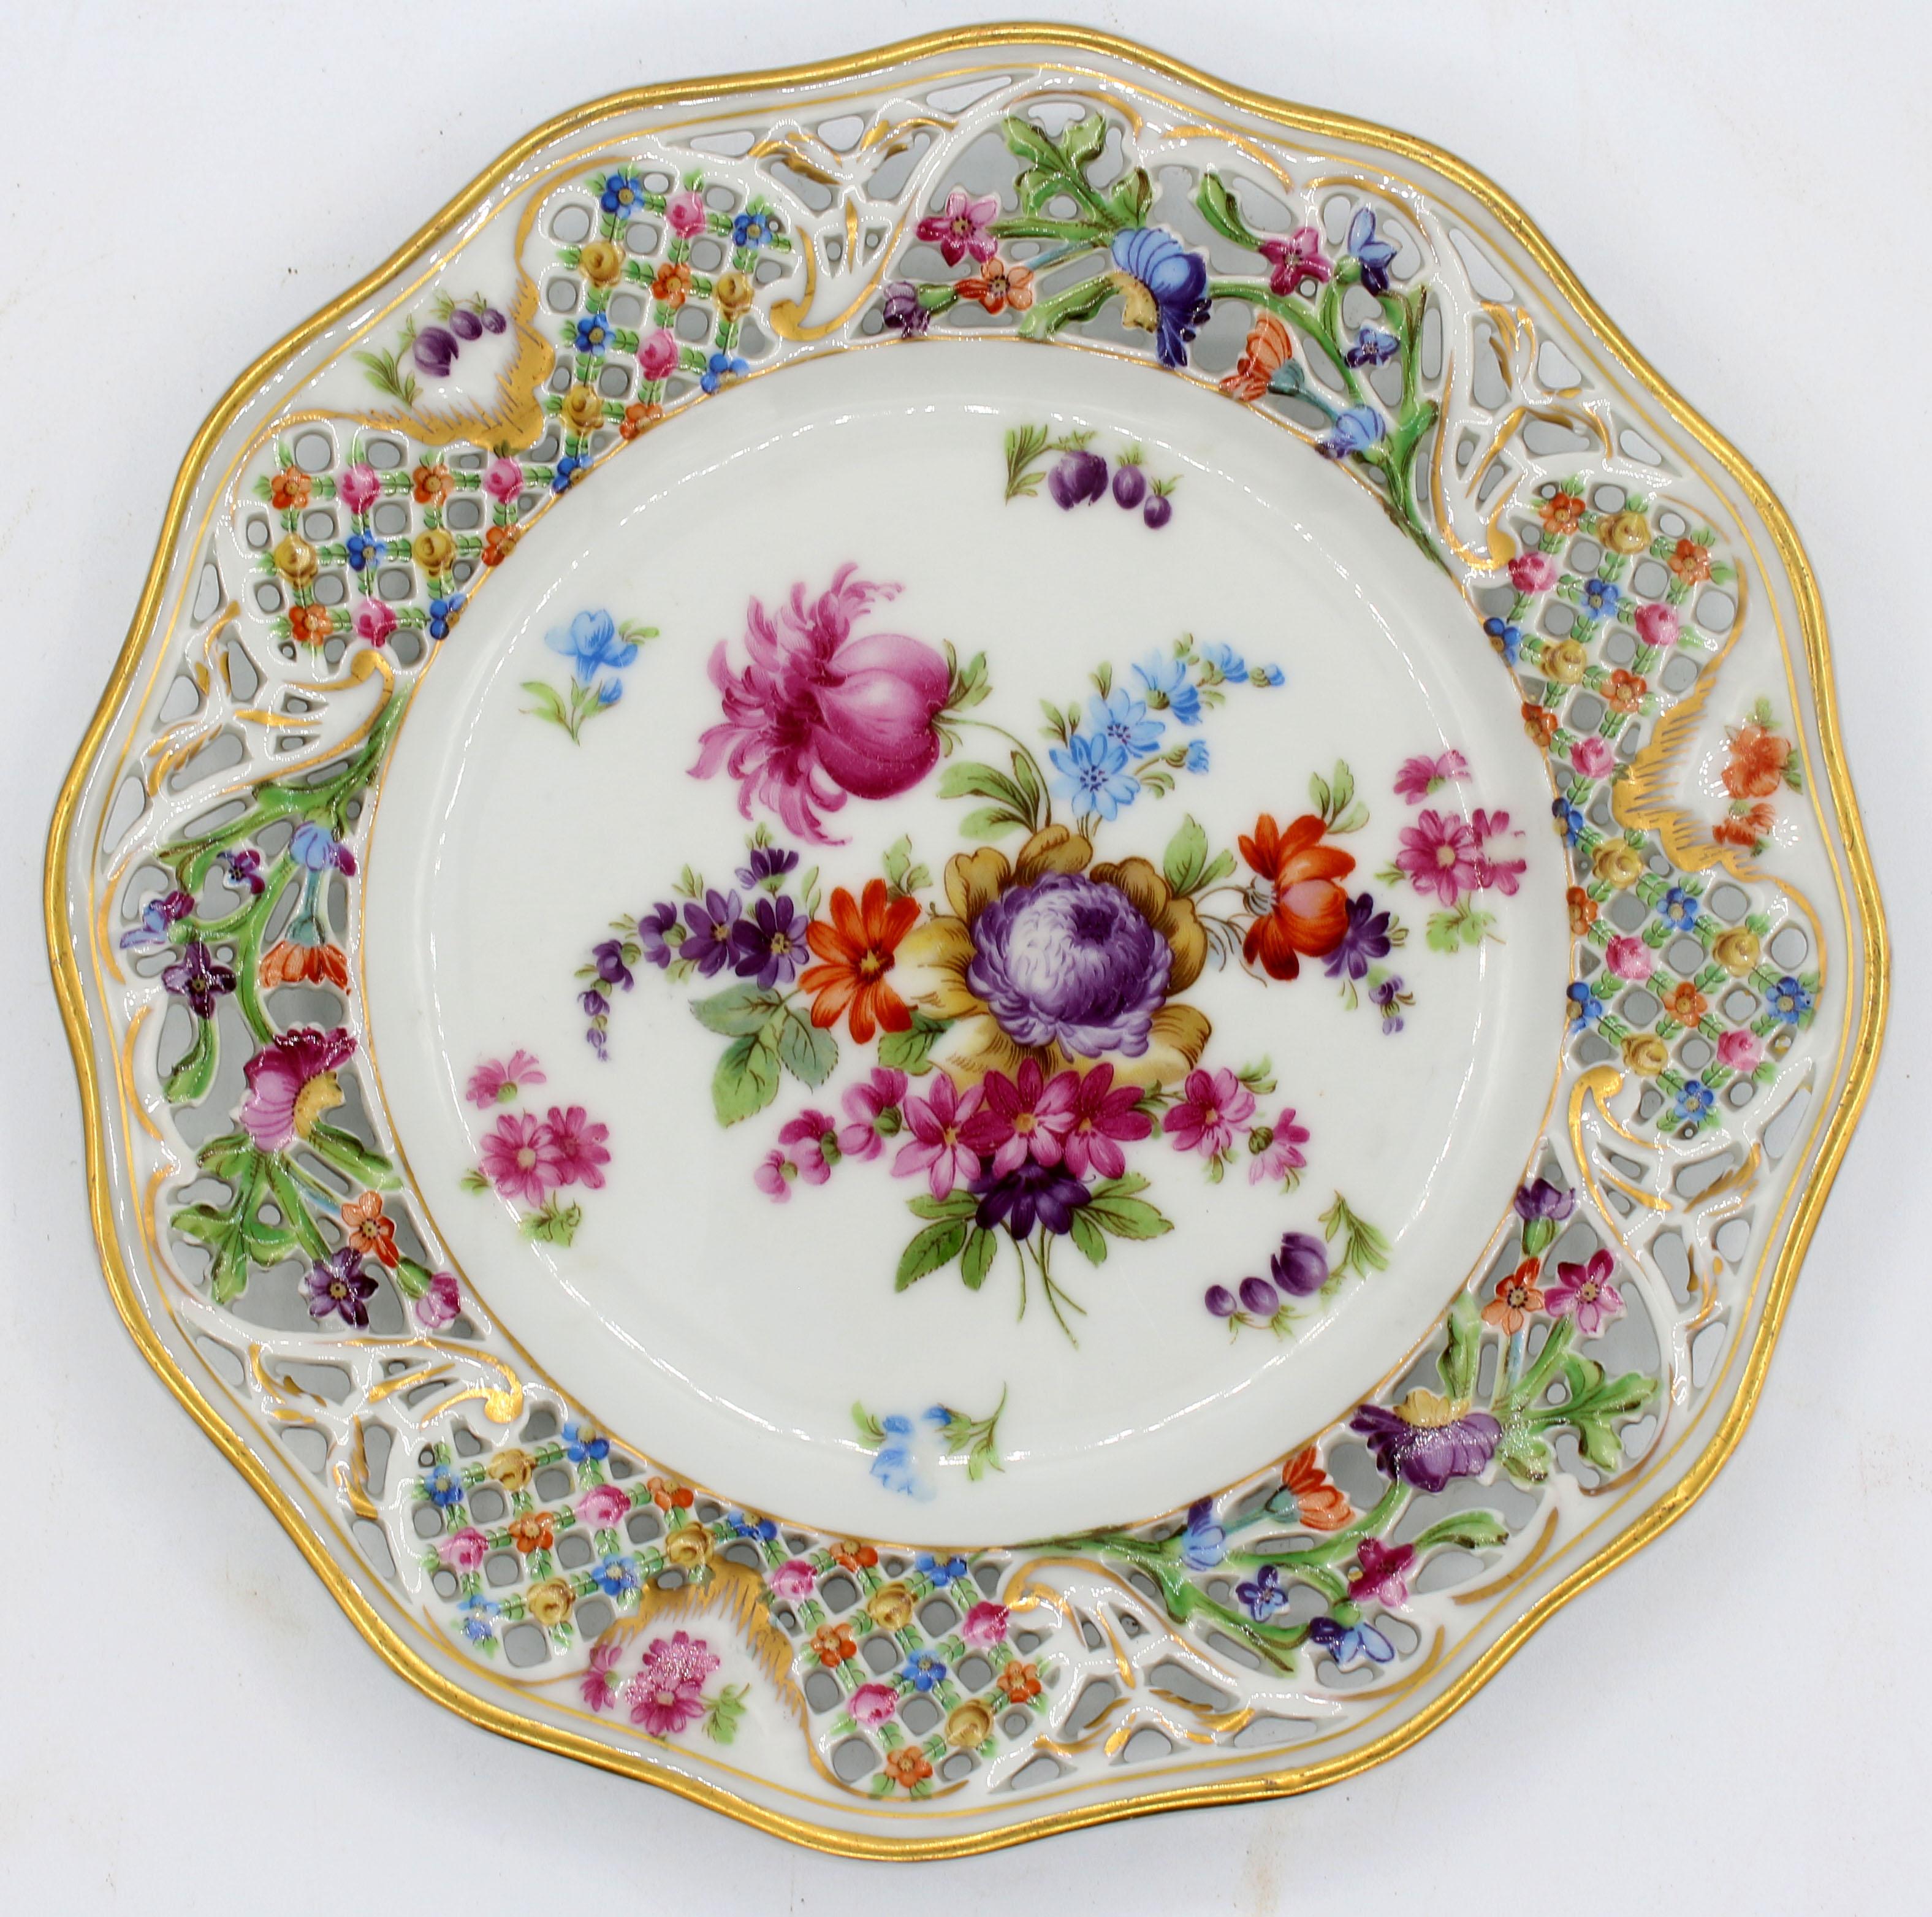 1932-1944 Set of 8 Dessert Plates by Schumann, Dresden & Bavaria periods In Good Condition For Sale In Chapel Hill, NC